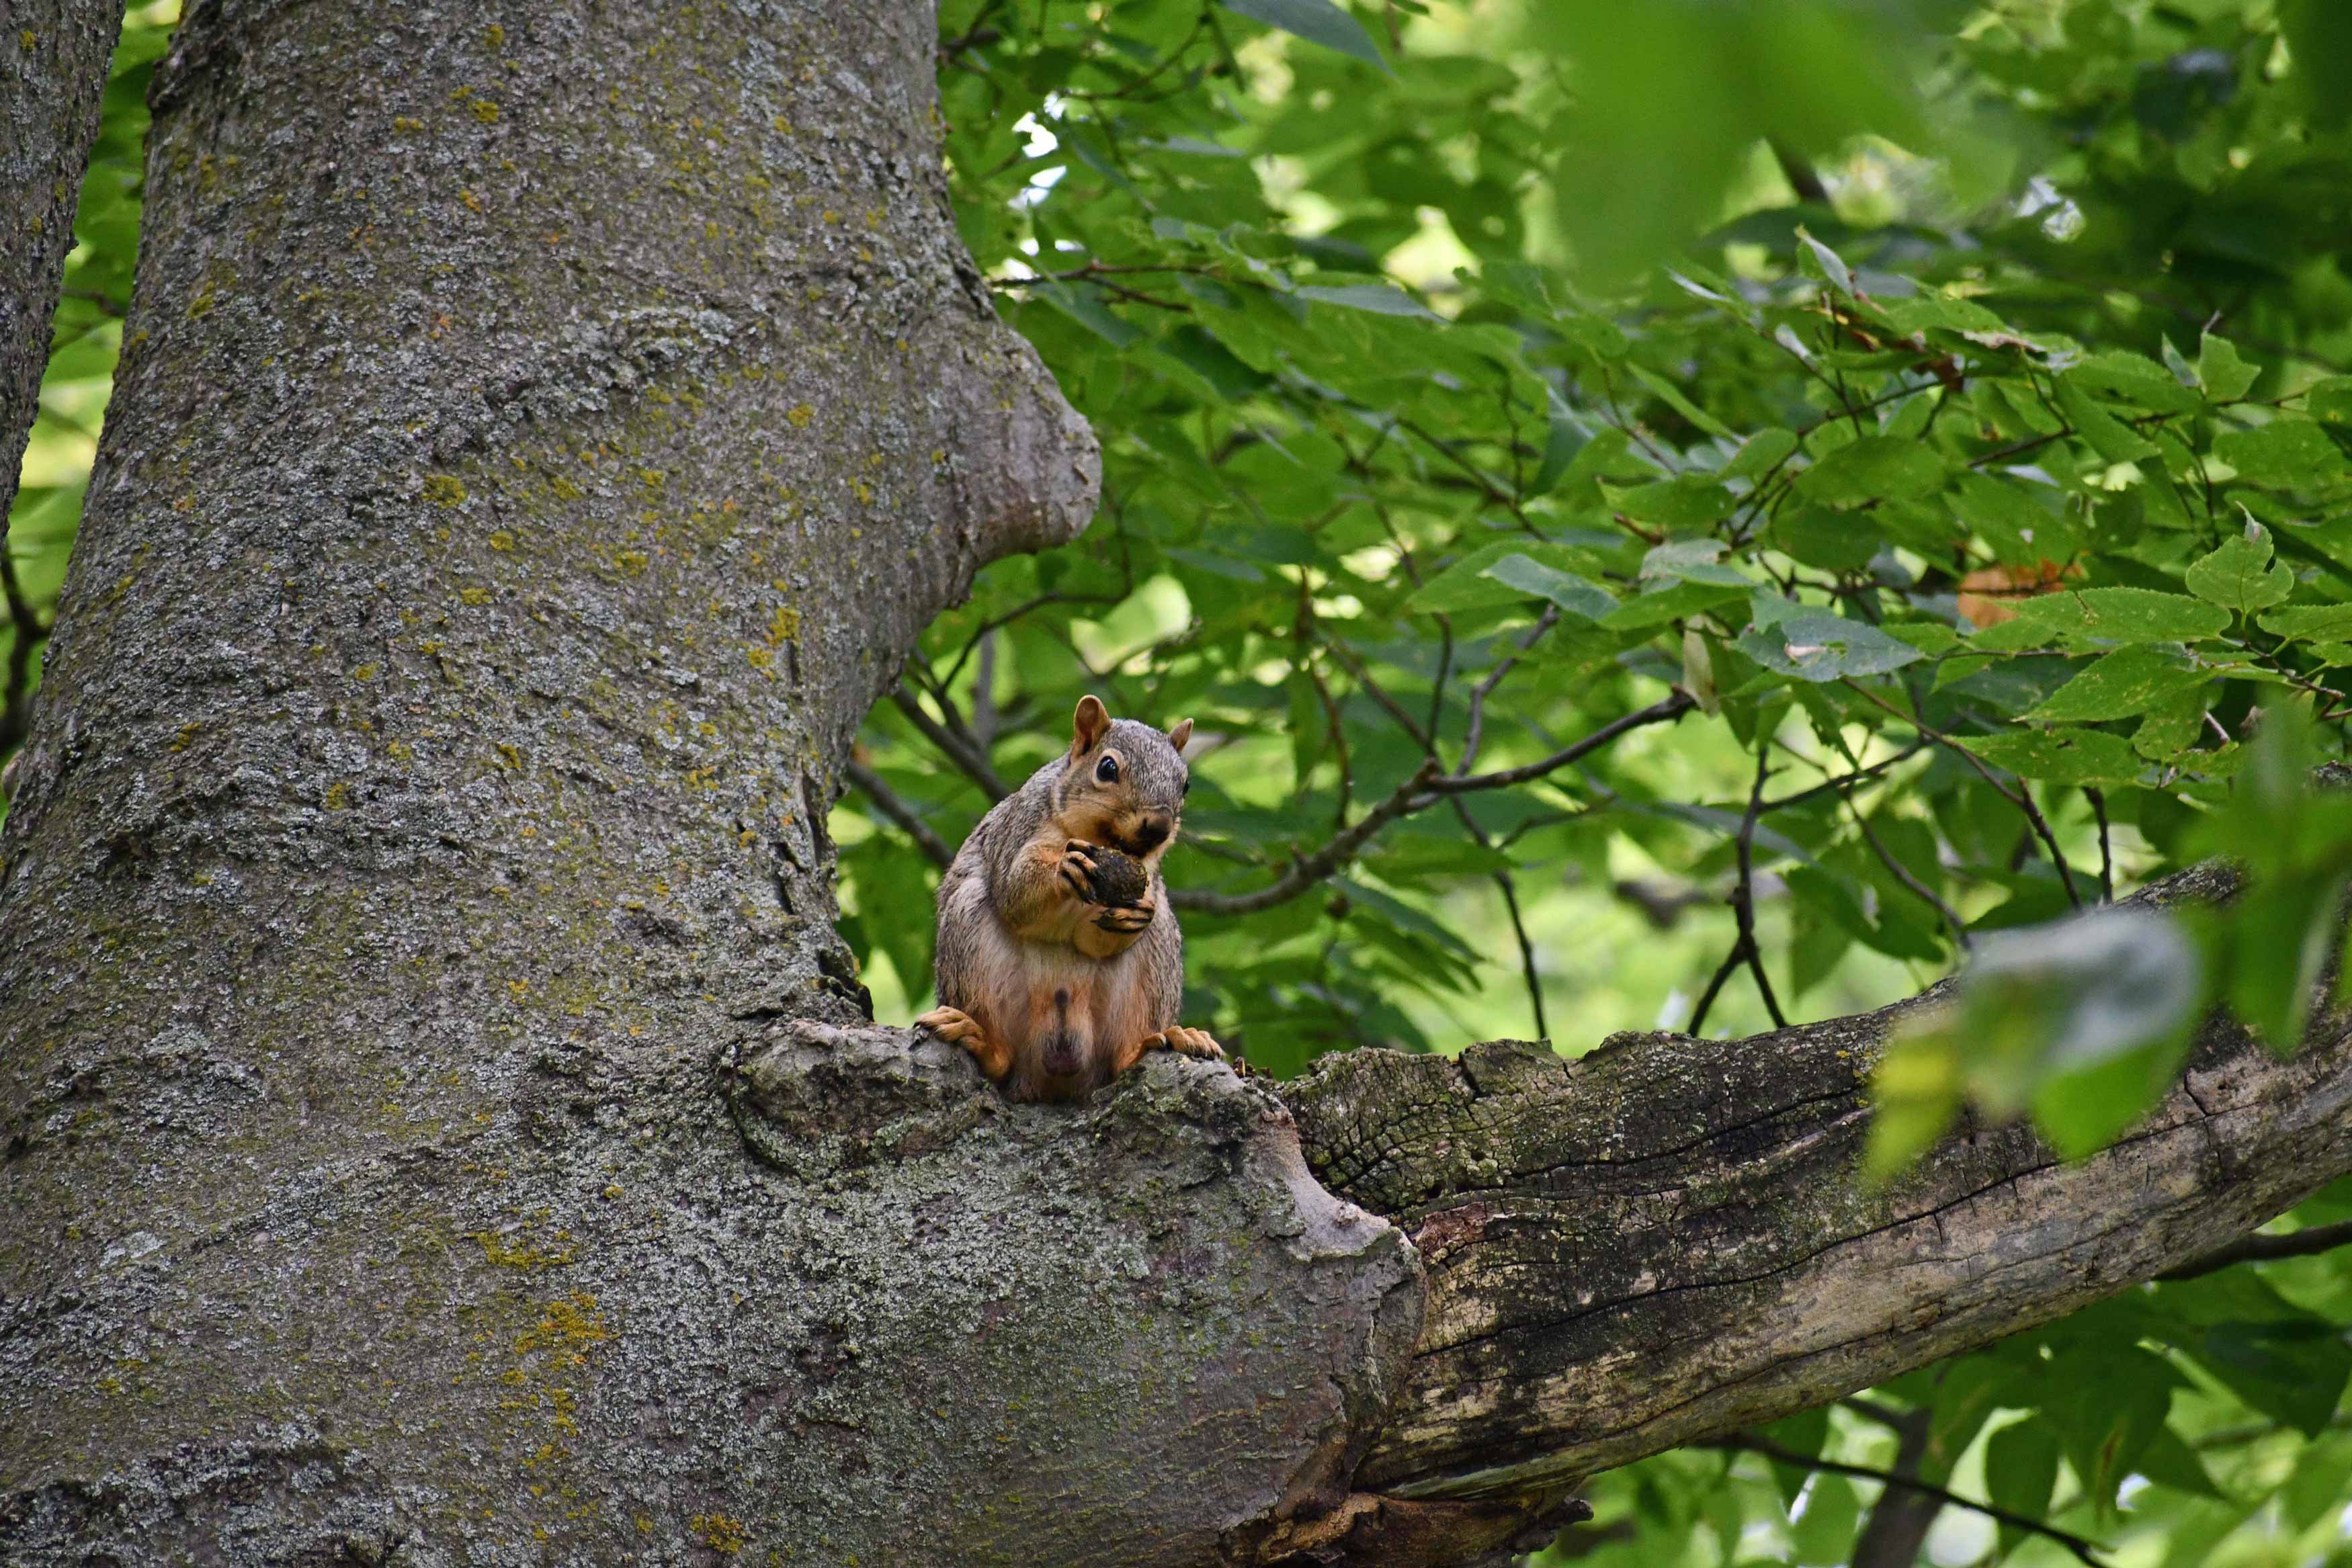 A squirrel eating a nut in a tree.